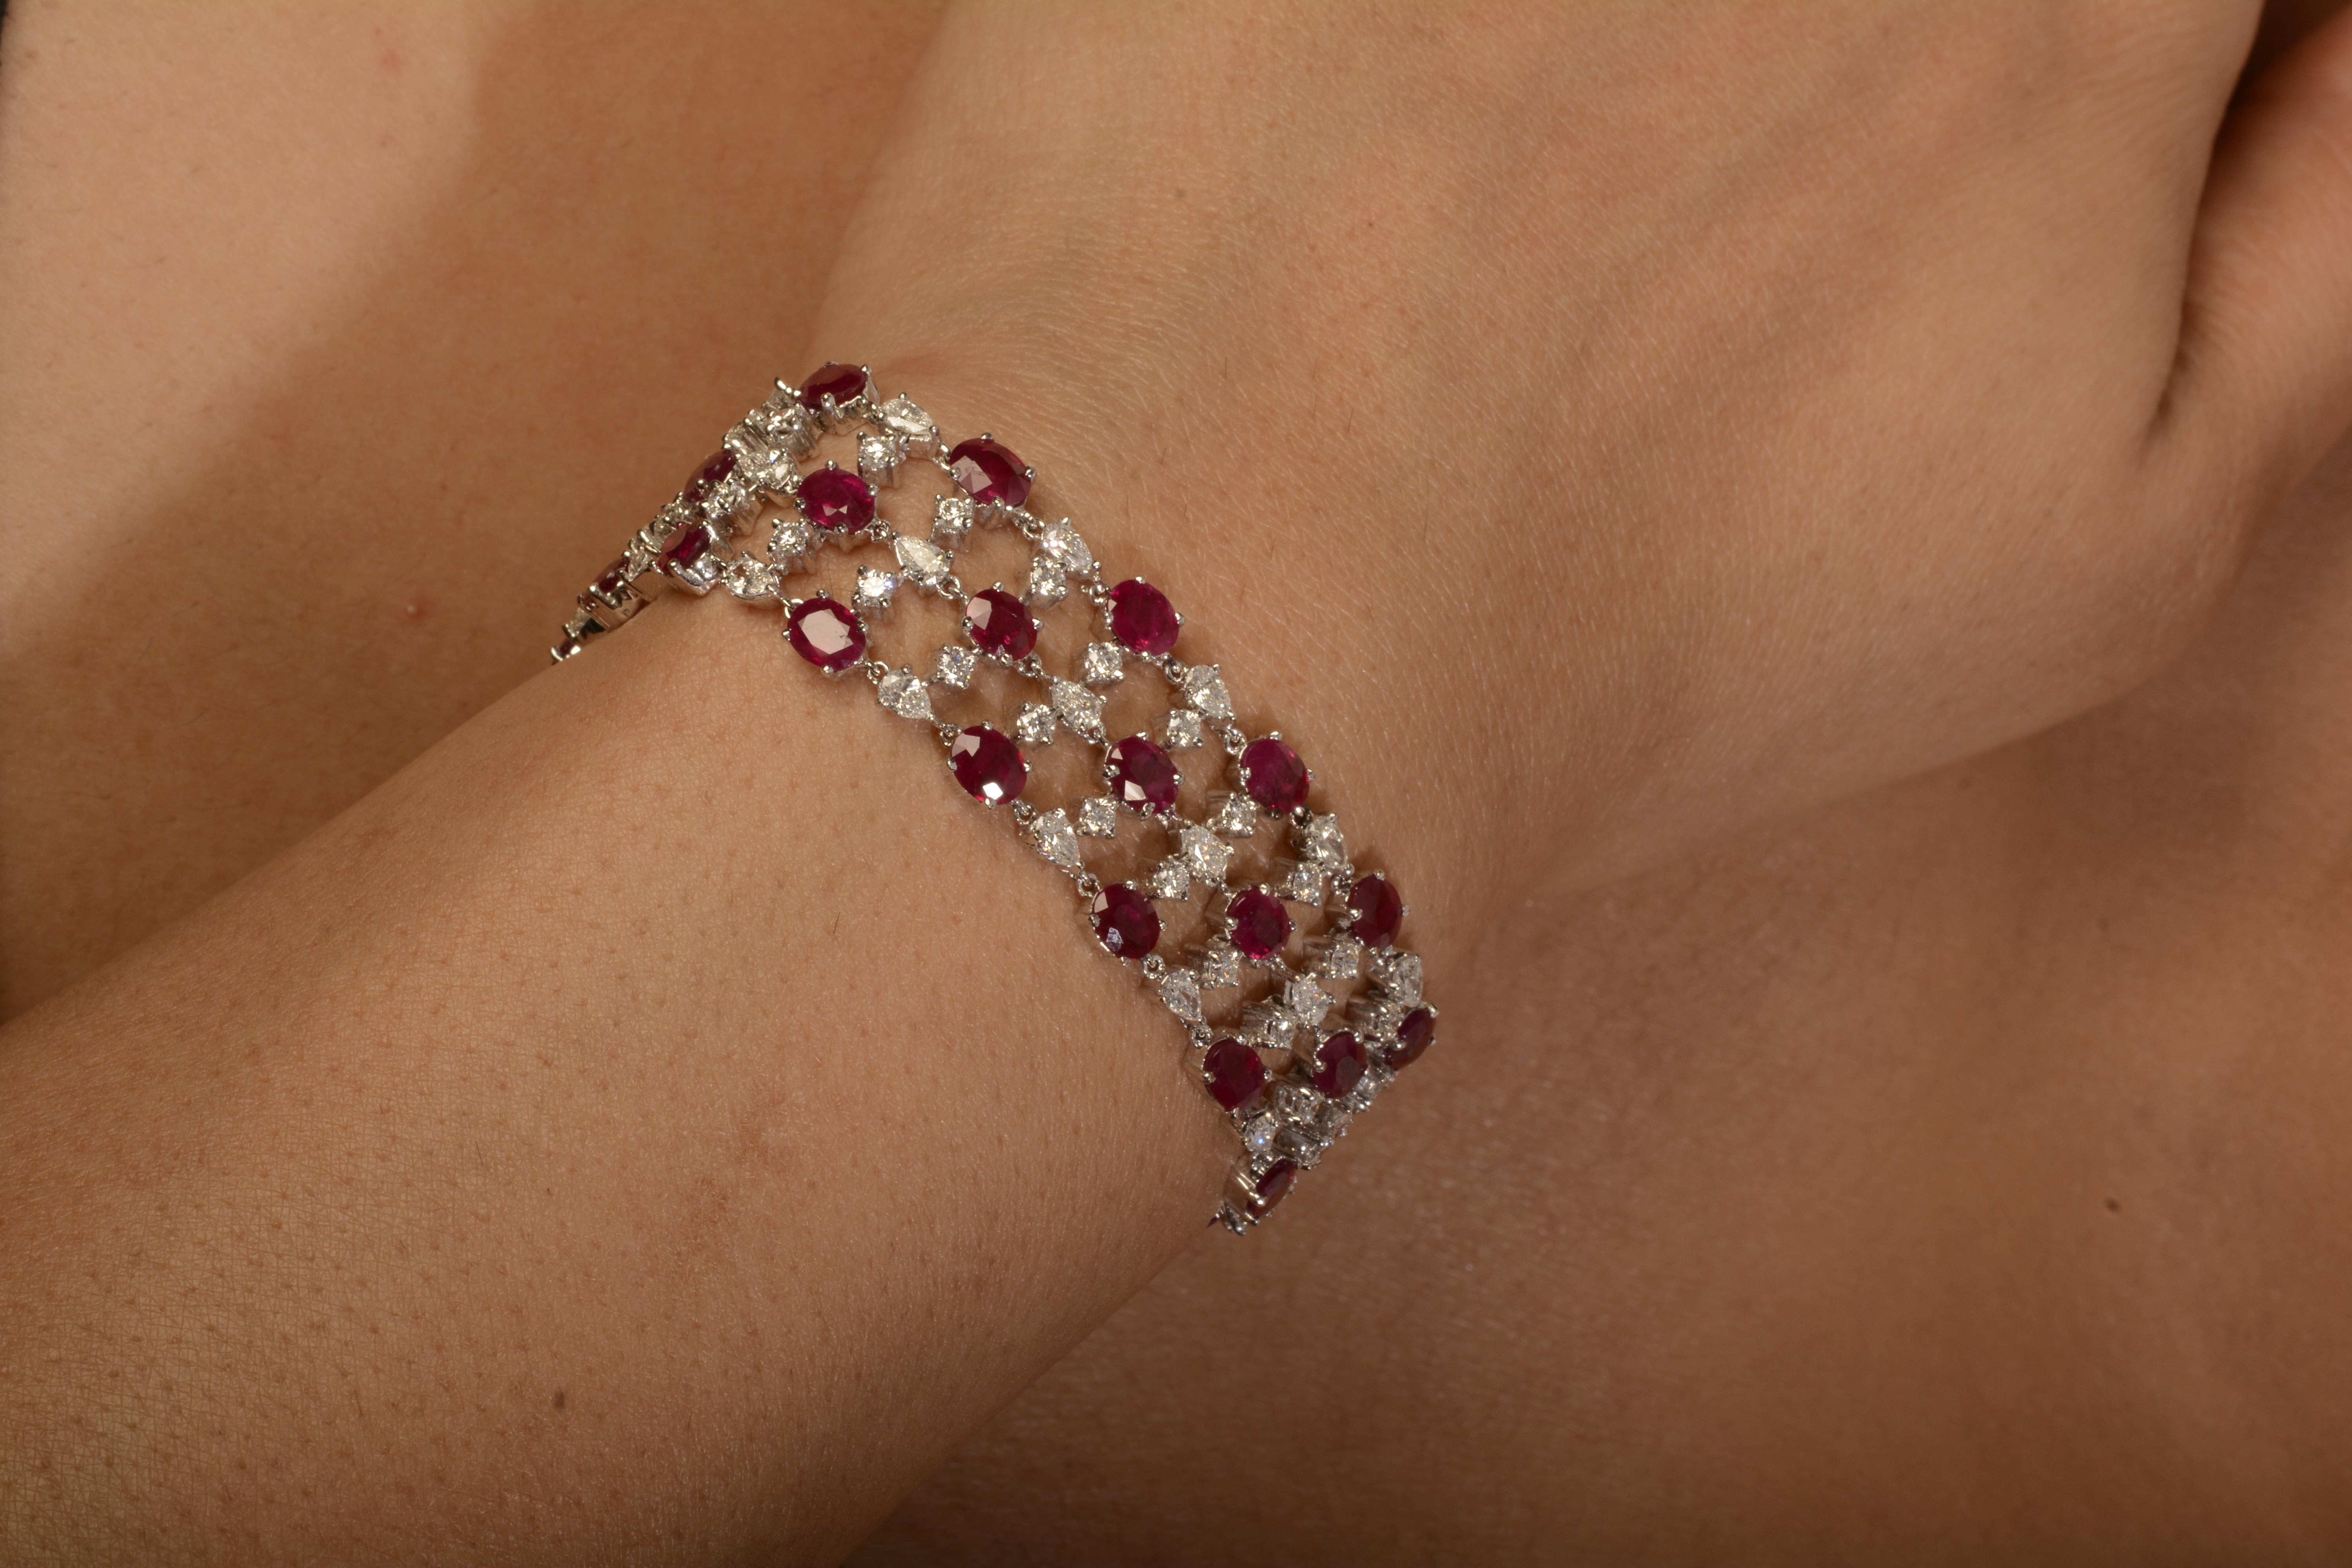 18 Karat White Gold Ruby and Diamond Bracelet

This beautifully crafted ruby and diamond bracelet set in 18kt white gold resembles the smooth flow of a river, serene and beautiful. It is ideal for both day and evening wear.

Diamonds - 5.61cts